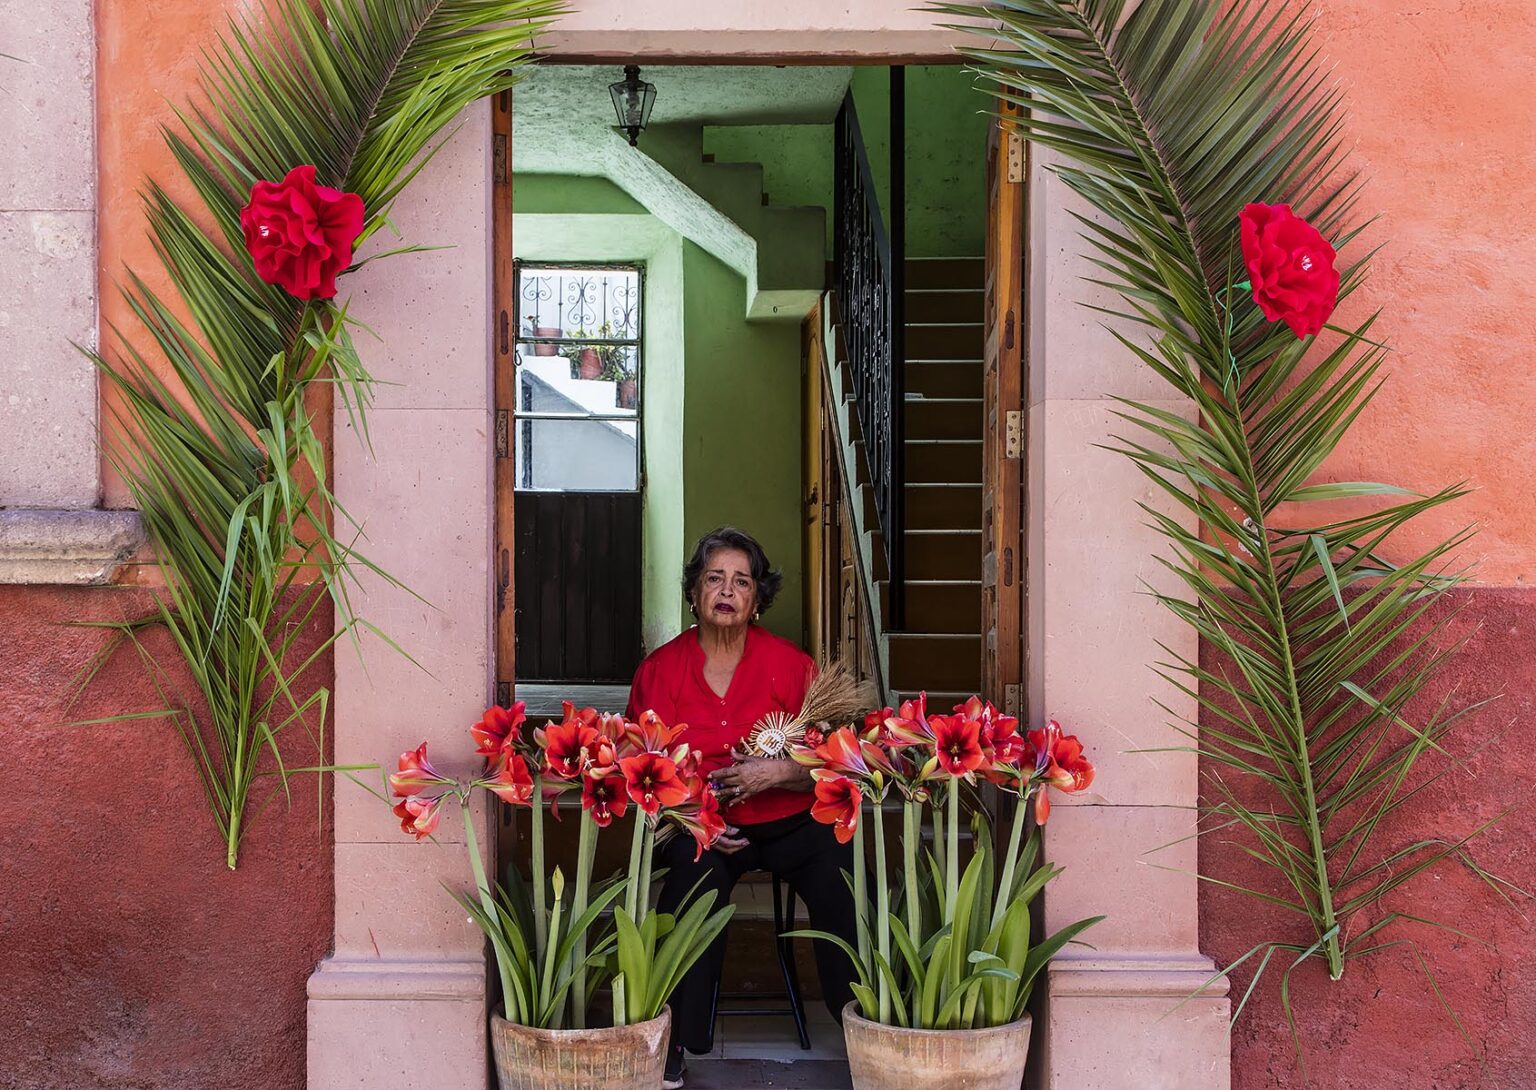 A Catholic woman has decorated her home along the route the PALM SUNDAY PROCESSION from Parque Juarez to the Jardin - SAN MIGUEL DE ALLENDE, MEXICO